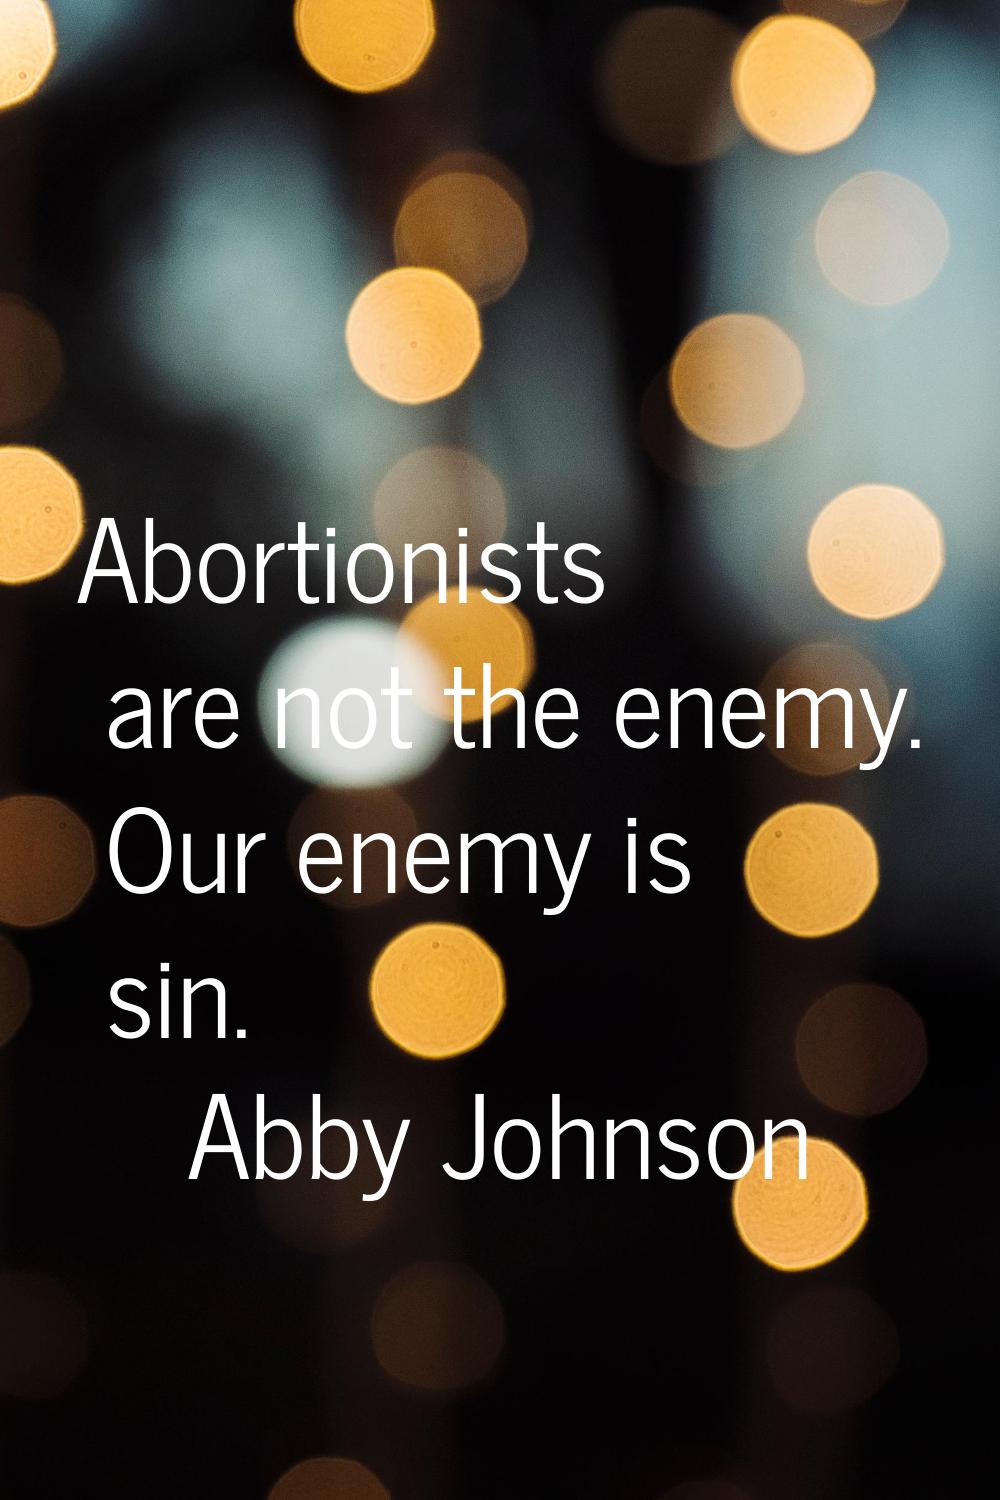 Abortionists are not the enemy. Our enemy is sin.